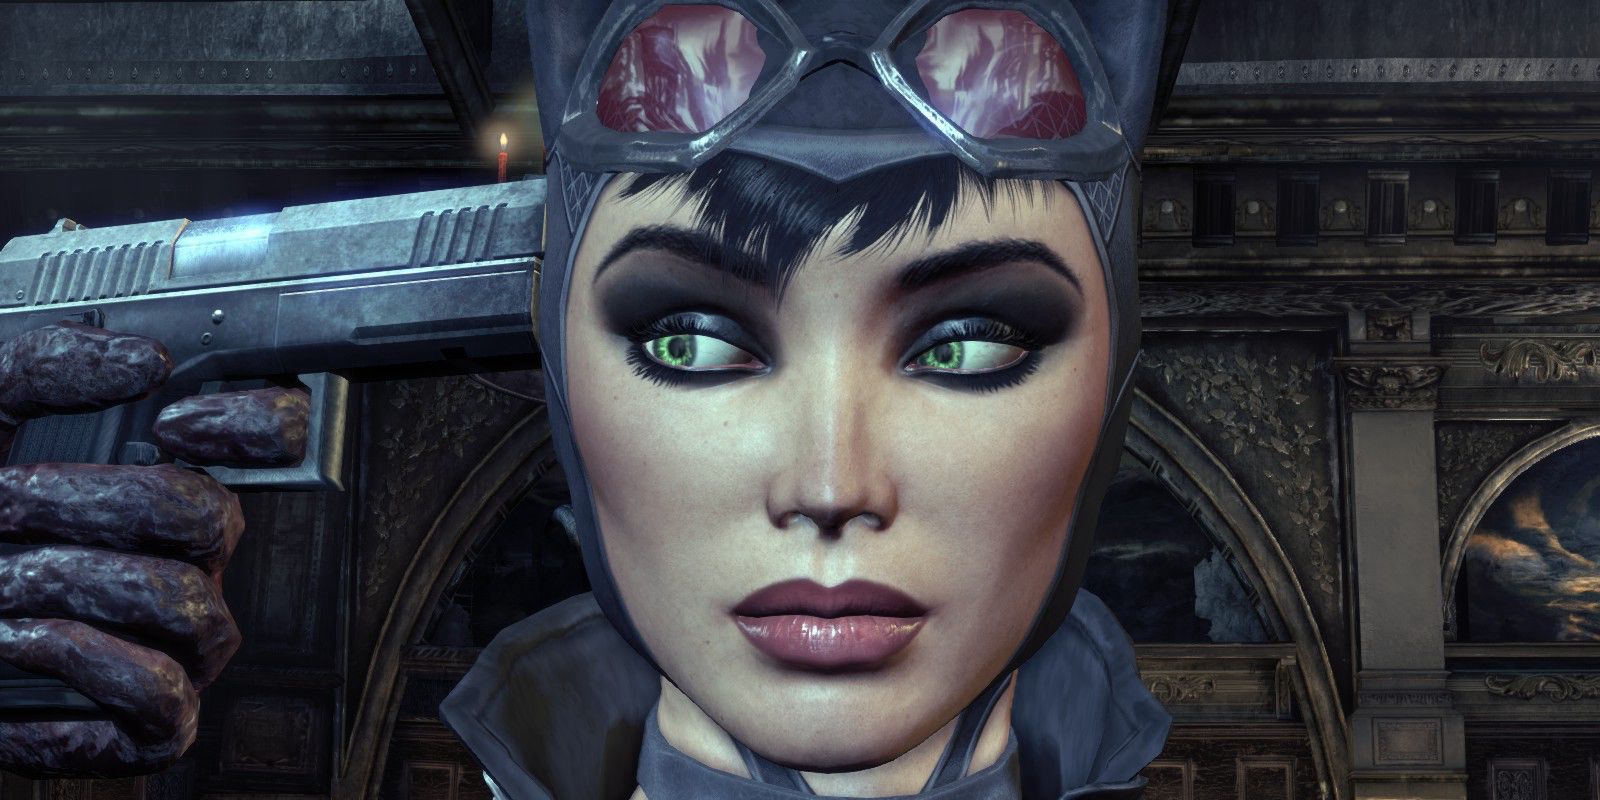 Arkham City's introduction has incredible foreshadowing and lets players play as Catwoman immediately